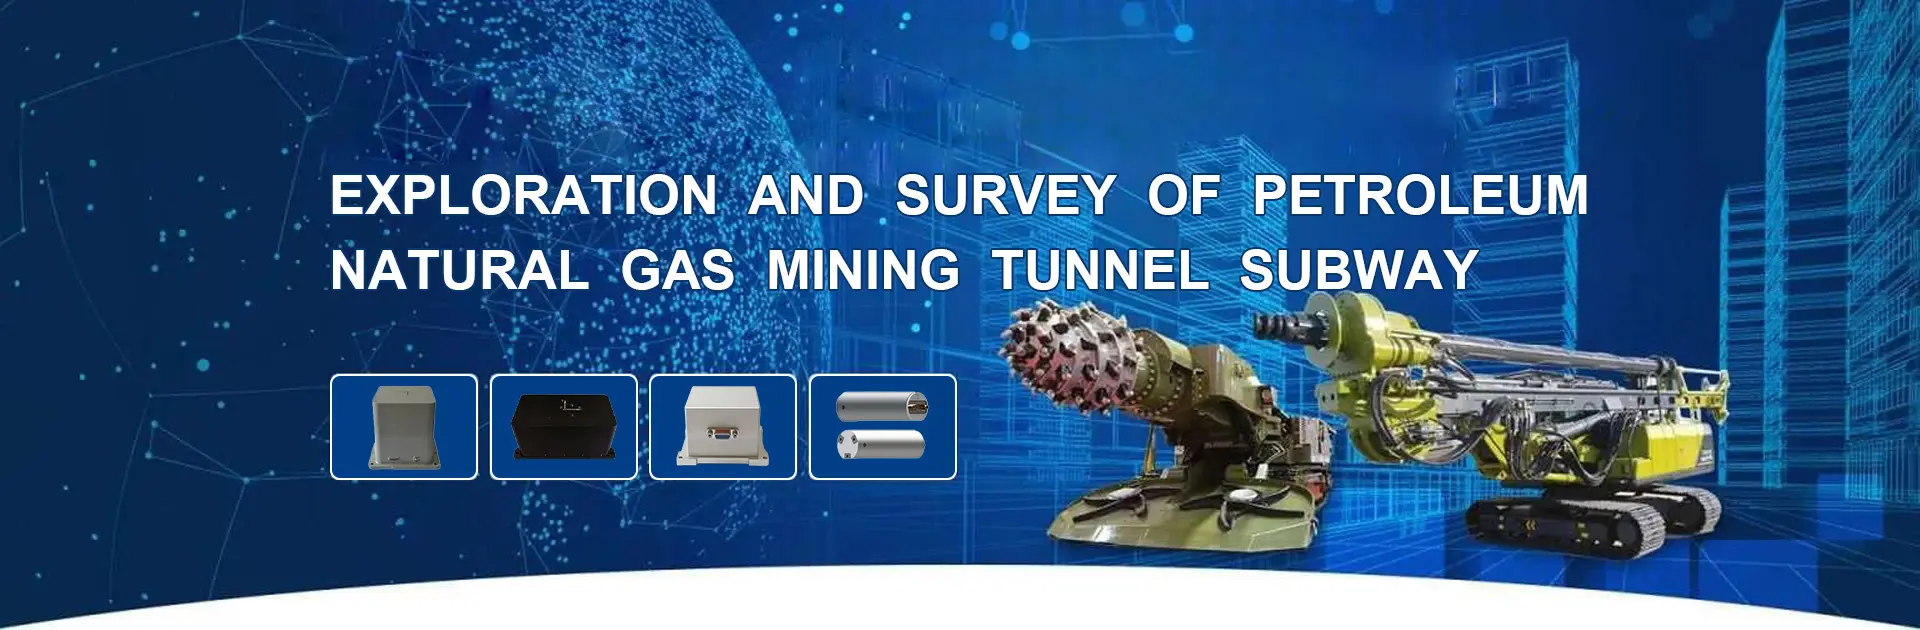 ERICCO-EXPLORATION-AND-SURVEY-OF-PETROLEUM-NATURAL-GAS-MINING-TUNNEL-SUBWAY-banner002